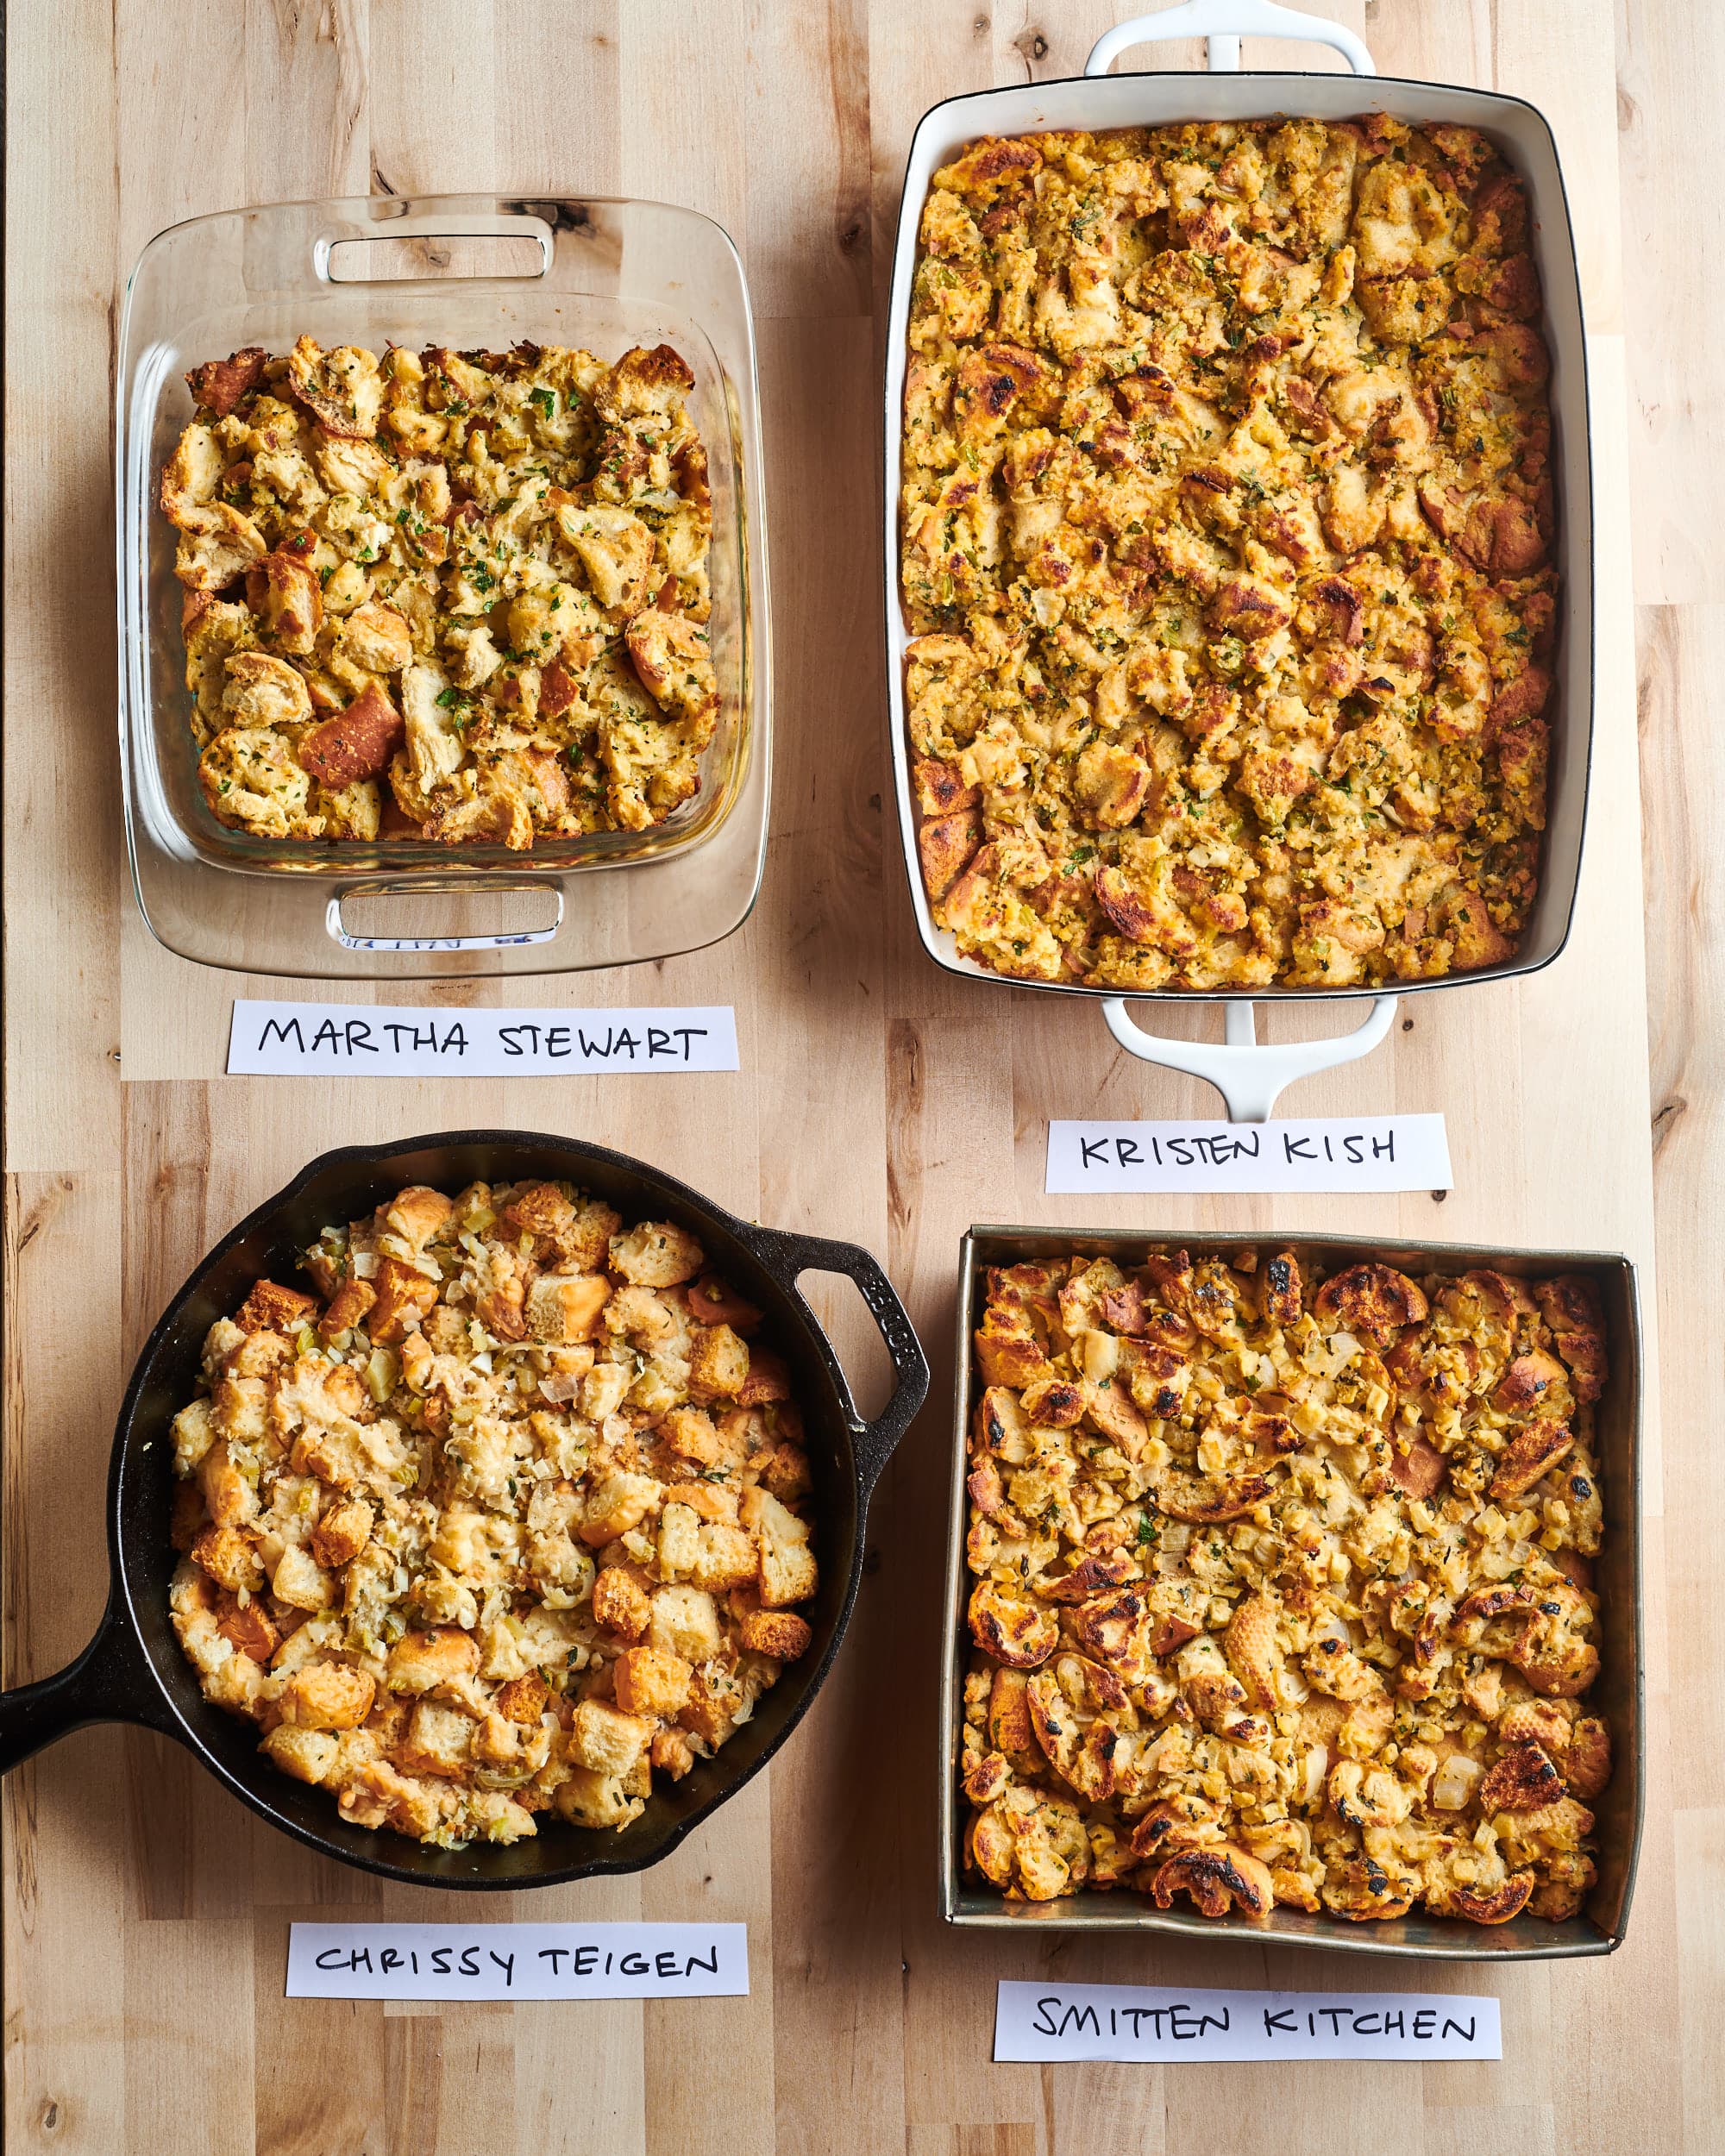 Better Than the Box Stuffing : Recipes : Cooking Channel Recipe